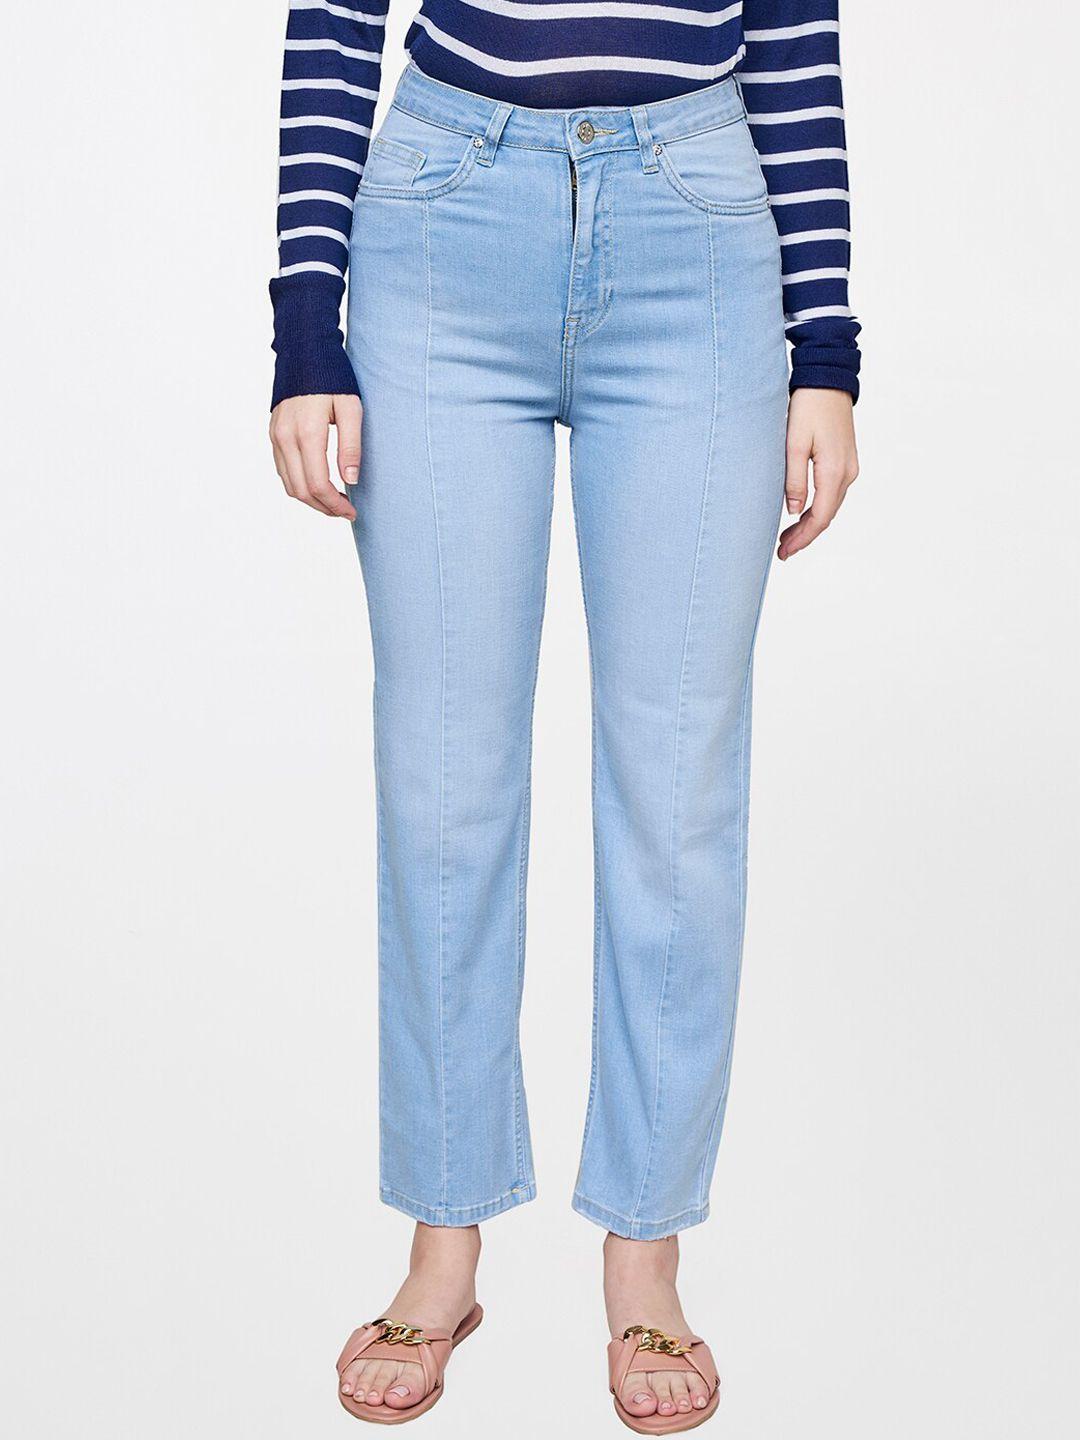 and-women-blue-trousers